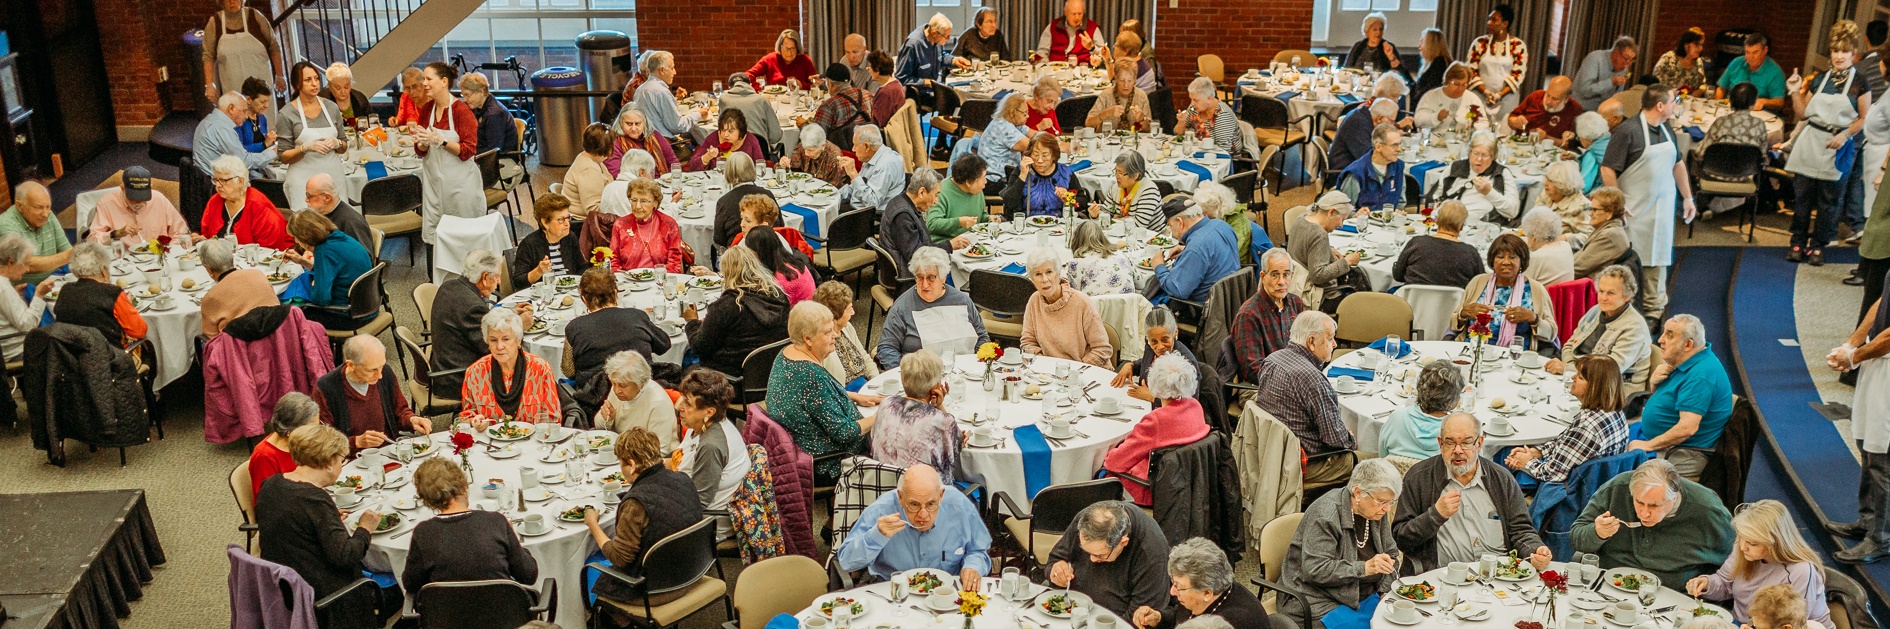 Thanksgiving luncheon for senior citizens at Bentley University